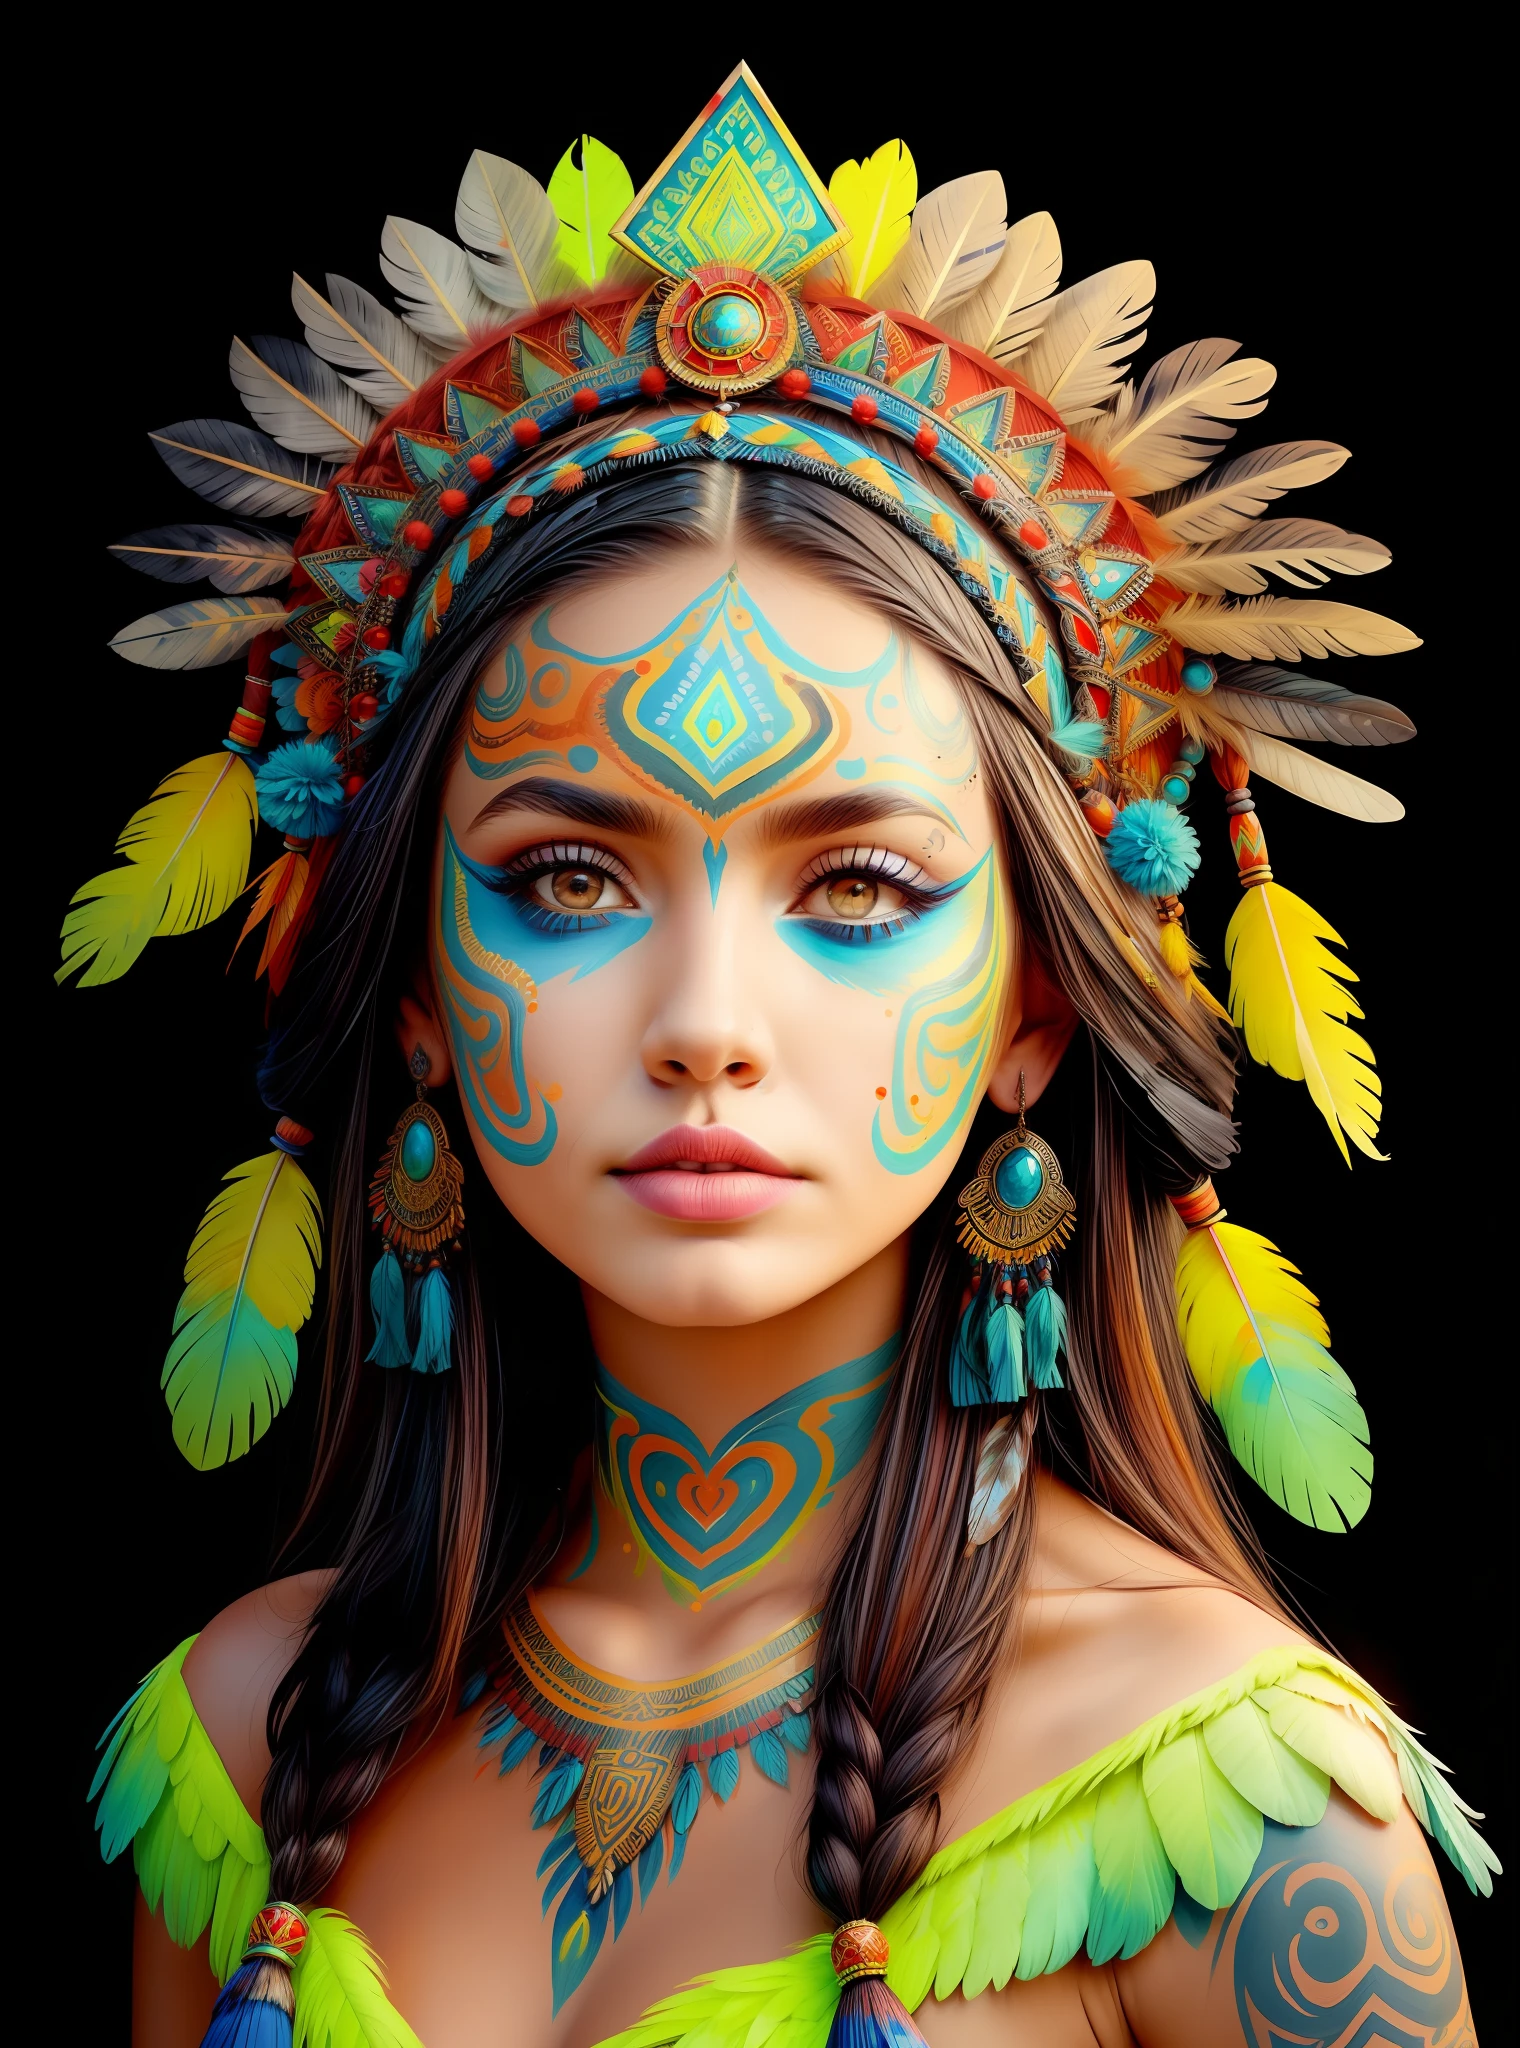 arafed woman in a feather headdress with feathers on her head,(((painted face))), aztec princess portrait, wearing crown of bright feathers, girl with feathers, beautiful young female shaman,painted face,(((Fluorescent))), she is dressed in shaman clothes, feathered headdress,sternum tattoo, ornate headdress, a young female shaman, angelina jolie uhd, headdress, : native american shamen fantasy, centered headdress,painted face,Fluorescent.